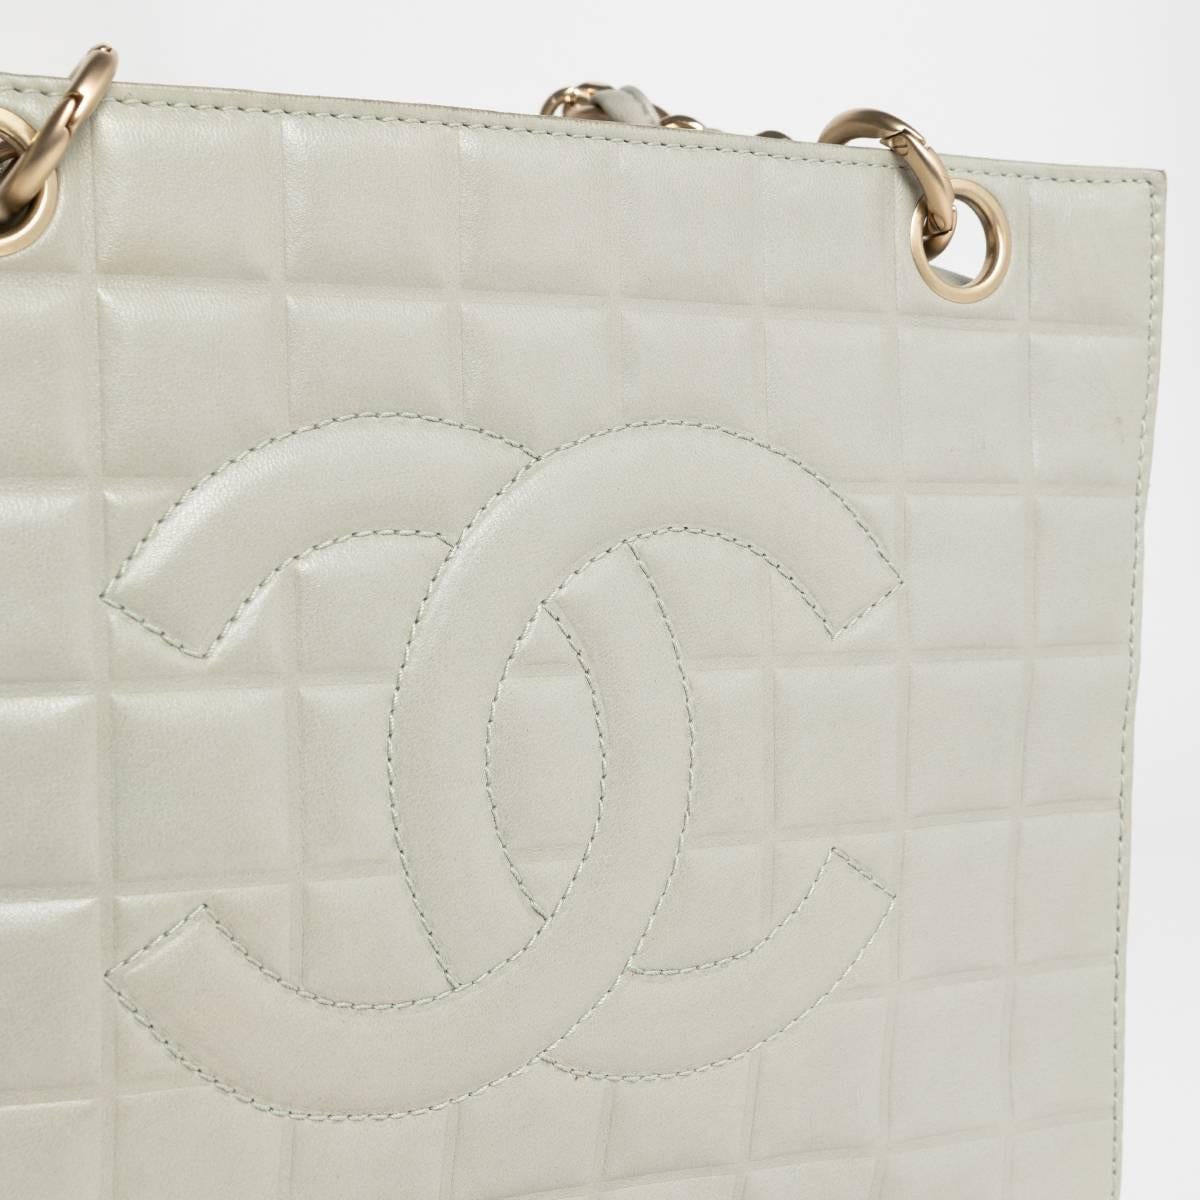 Chanel Grey Leather Pst Icecube With Light Gold Mat Hardware For Sale 5